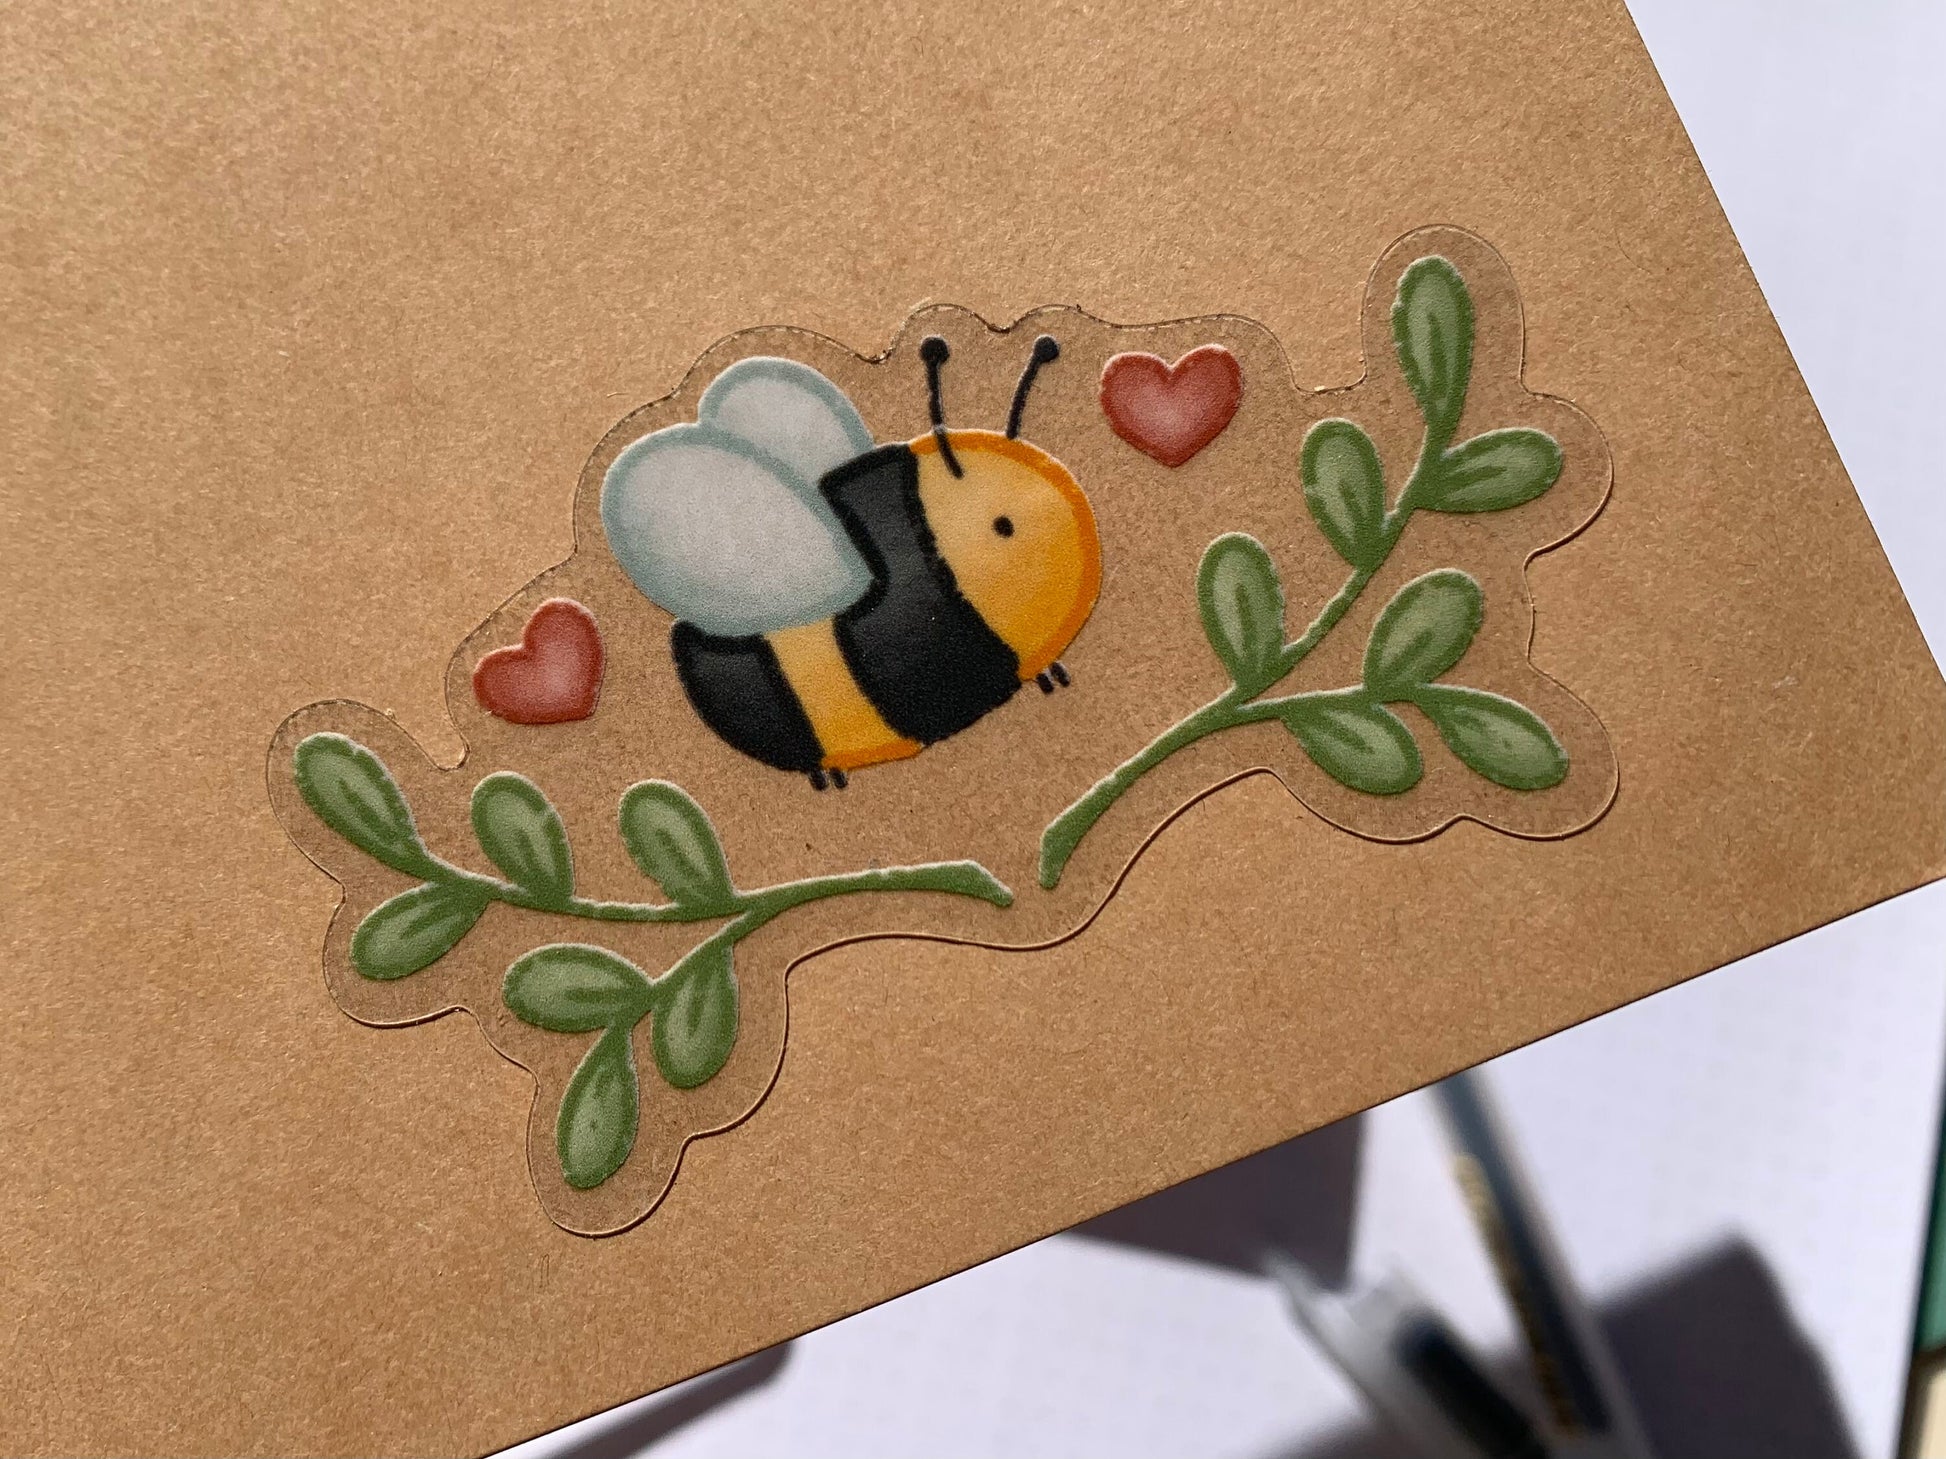 Clear Waterproof Bumble Bee Sticker | Decal Sticker, Bumble Bee, Bees, Save the Bees, Insects, Kawaii Art, Yellow, Aesthetic